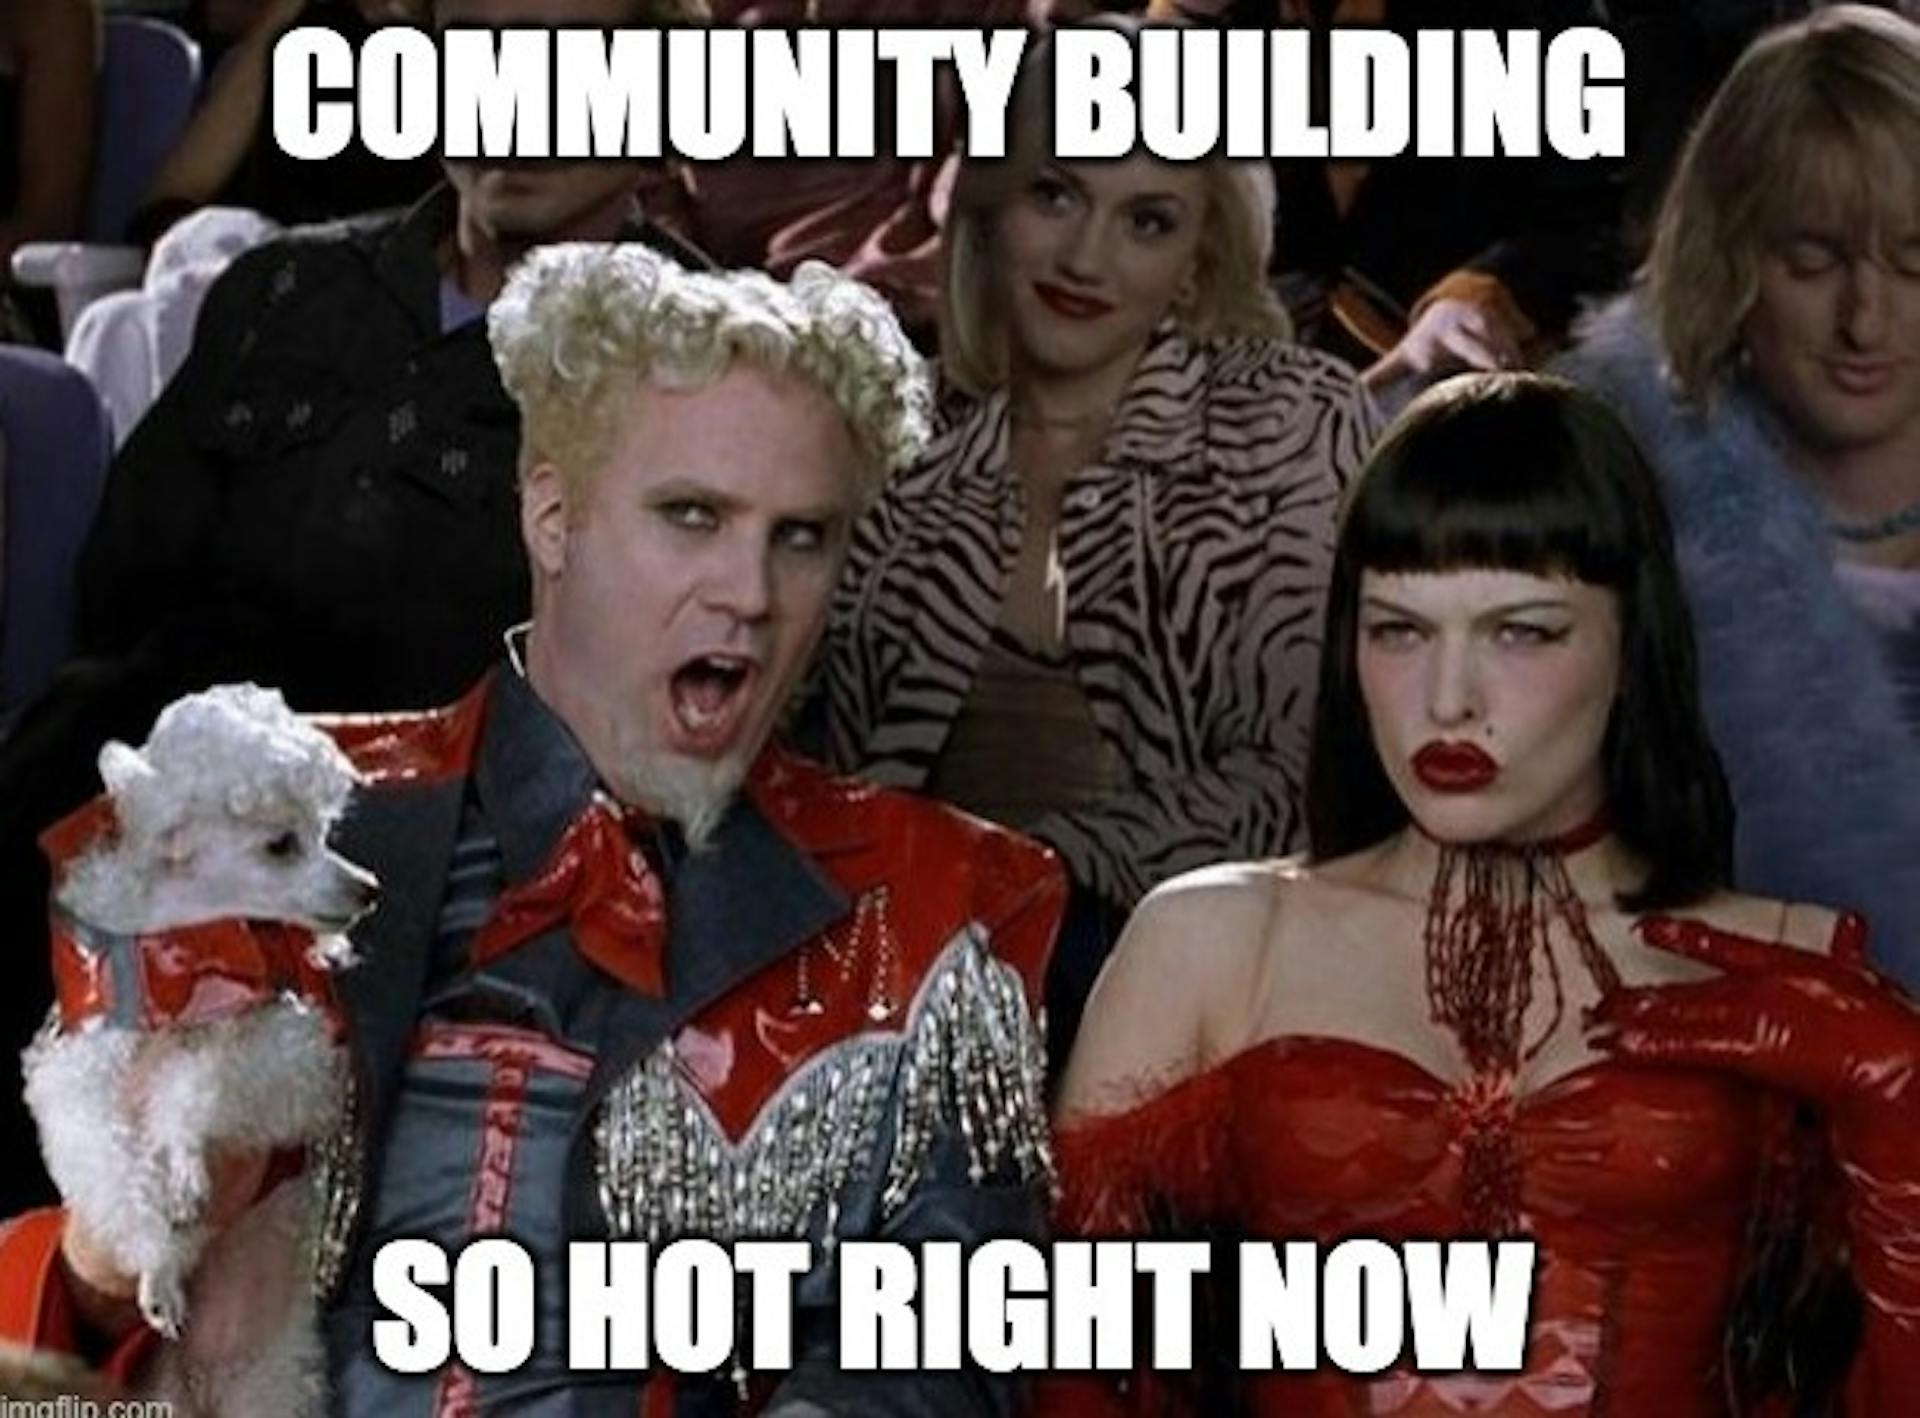 https://cmxhub.com/memes-should-be-part-of-your-community-strategy-heres-why/